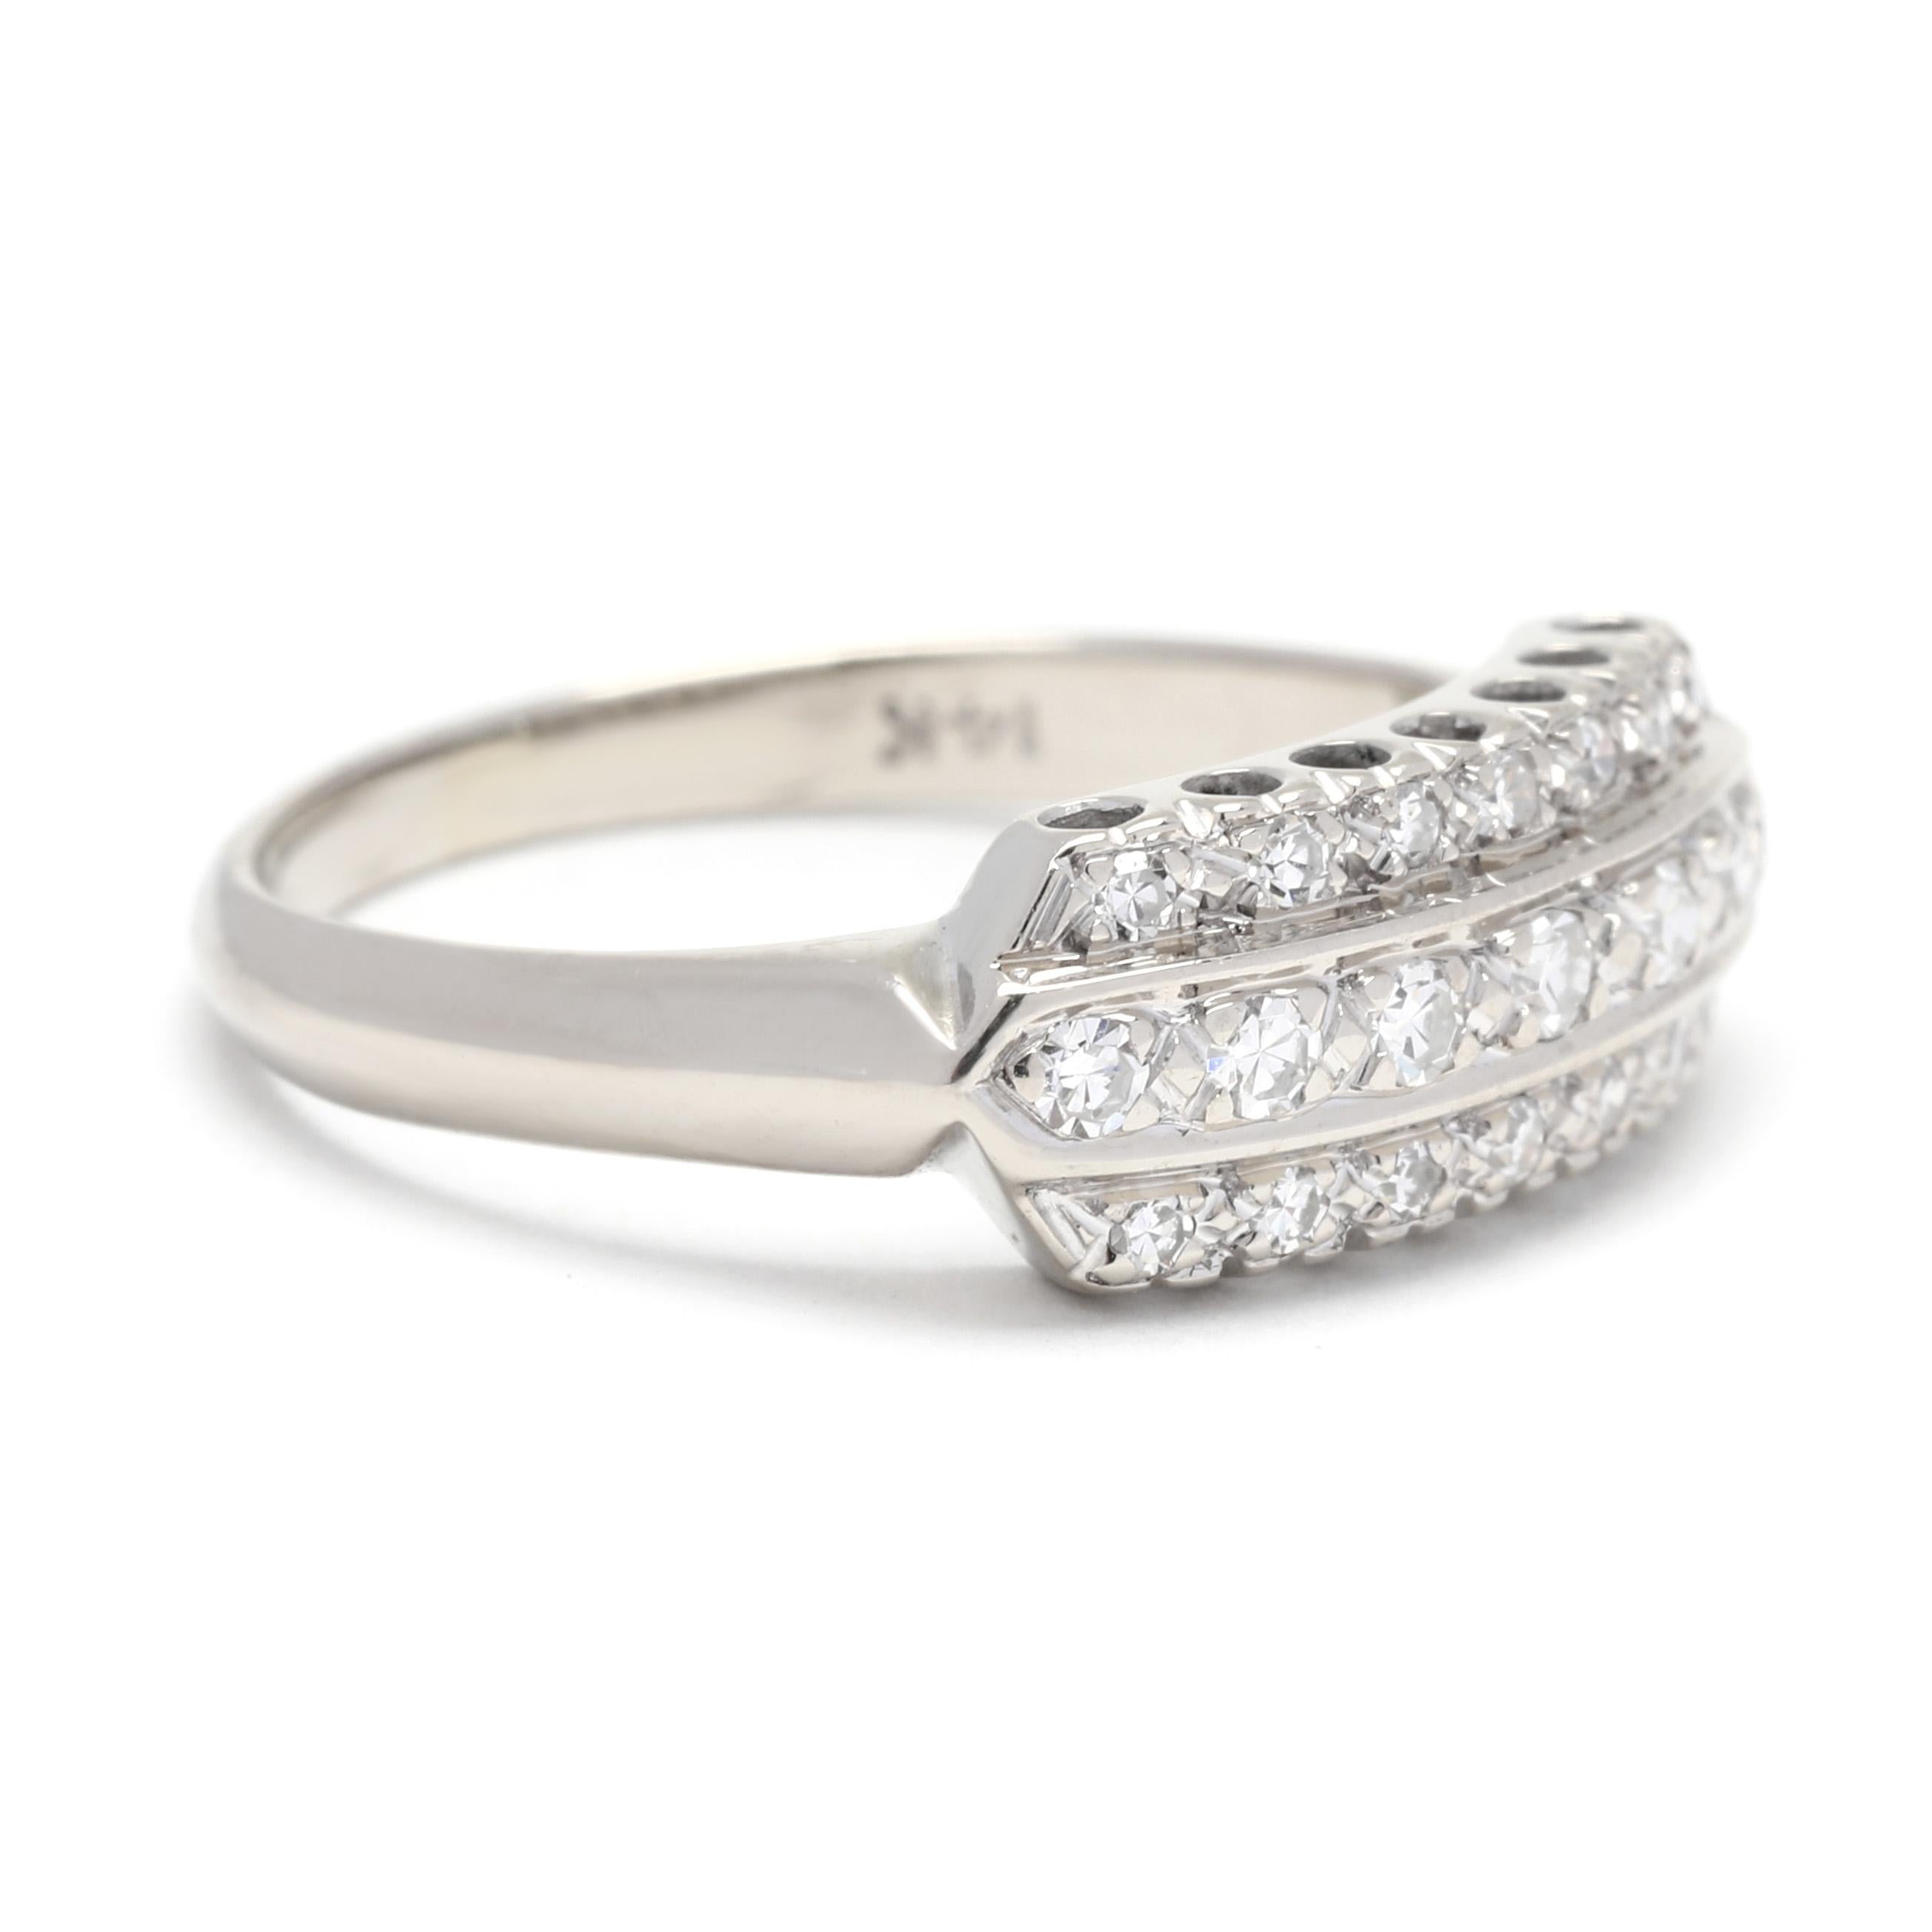 This vintage 0.15ctw three row diamond band is crafted in 14K white gold and is a size 4.25. The simple yet elegant design of this beautiful pinky ring is sure to make a statement. It features three rows of round diamonds that sparkle and shine,